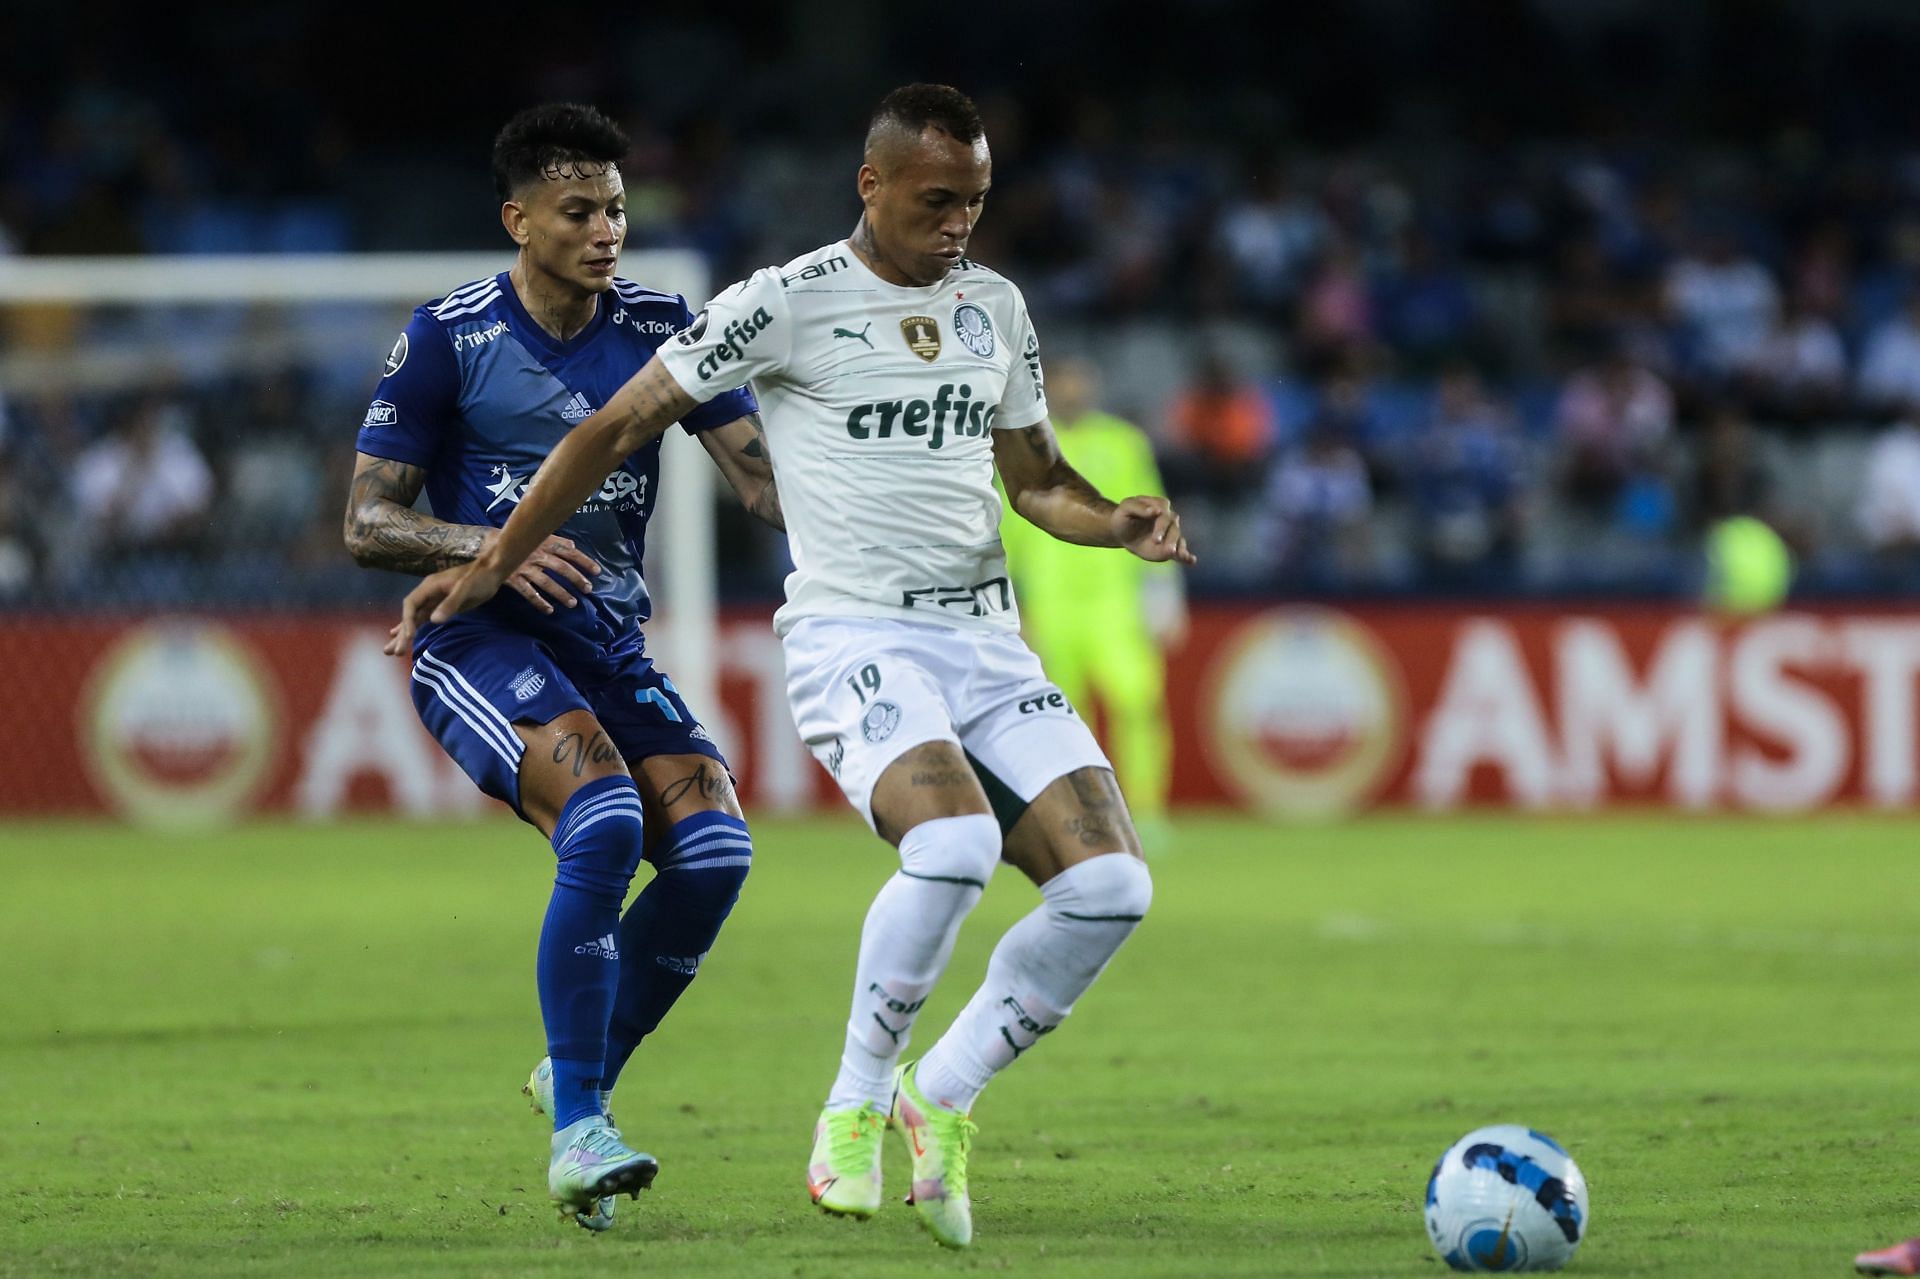 Club Sport Emelec play host to Independiente Petrolero on Tuesday